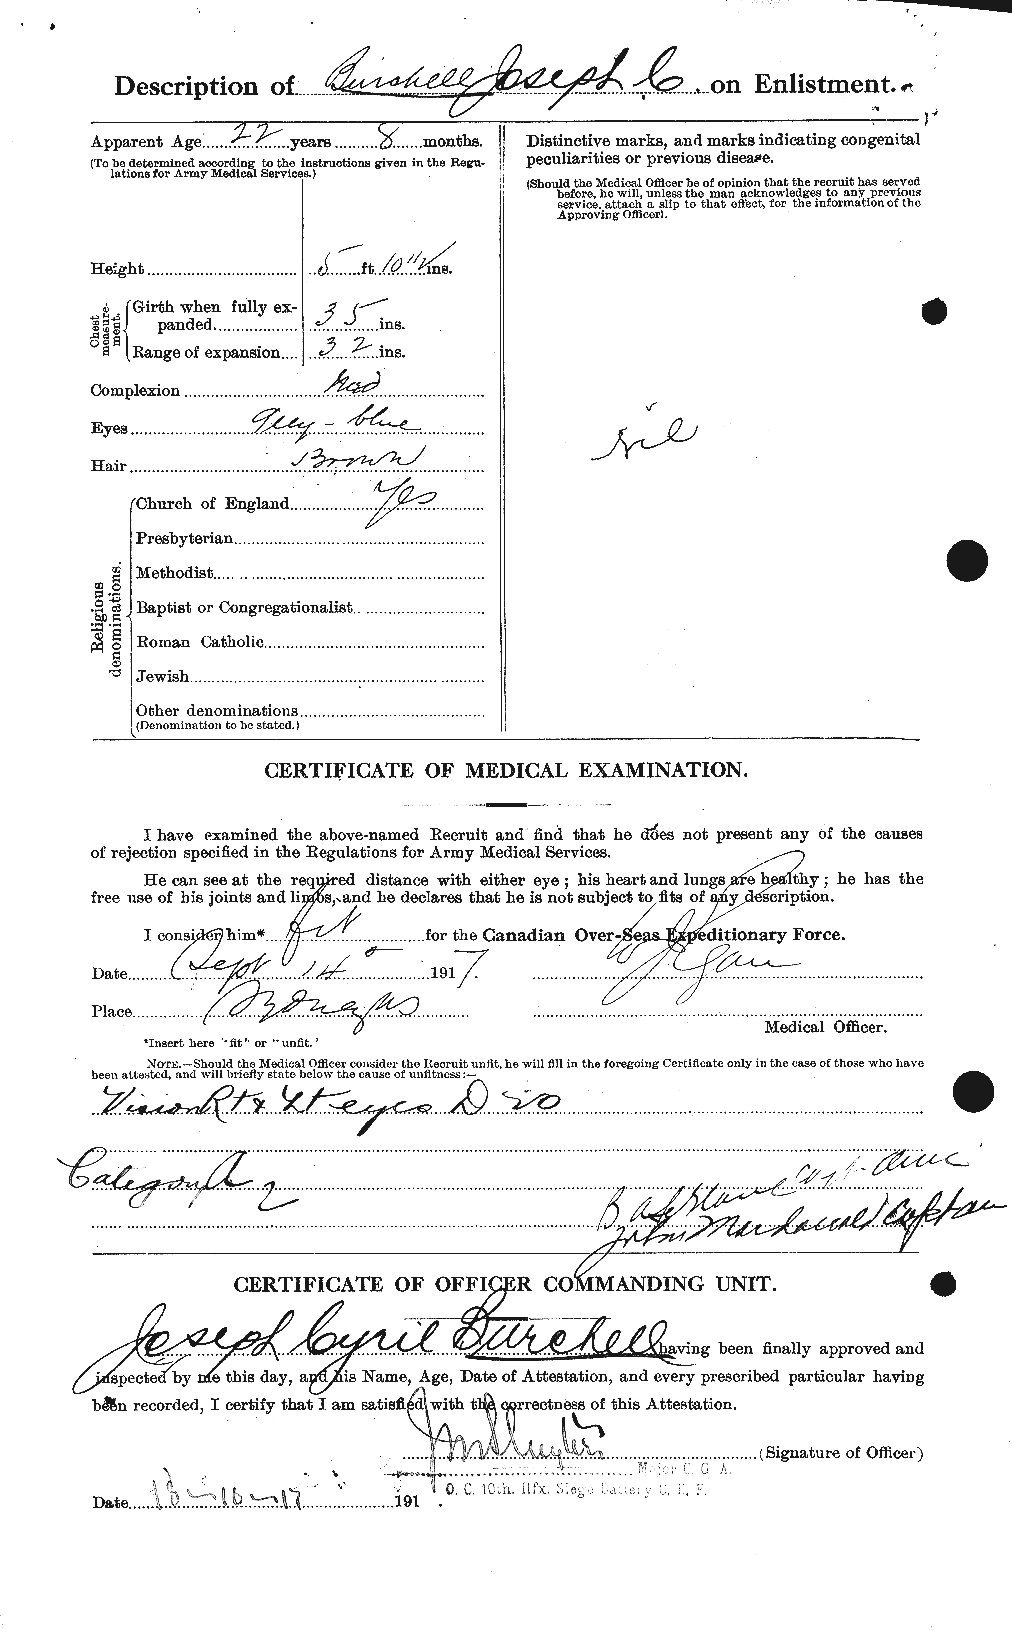 Personnel Records of the First World War - CEF 273155b